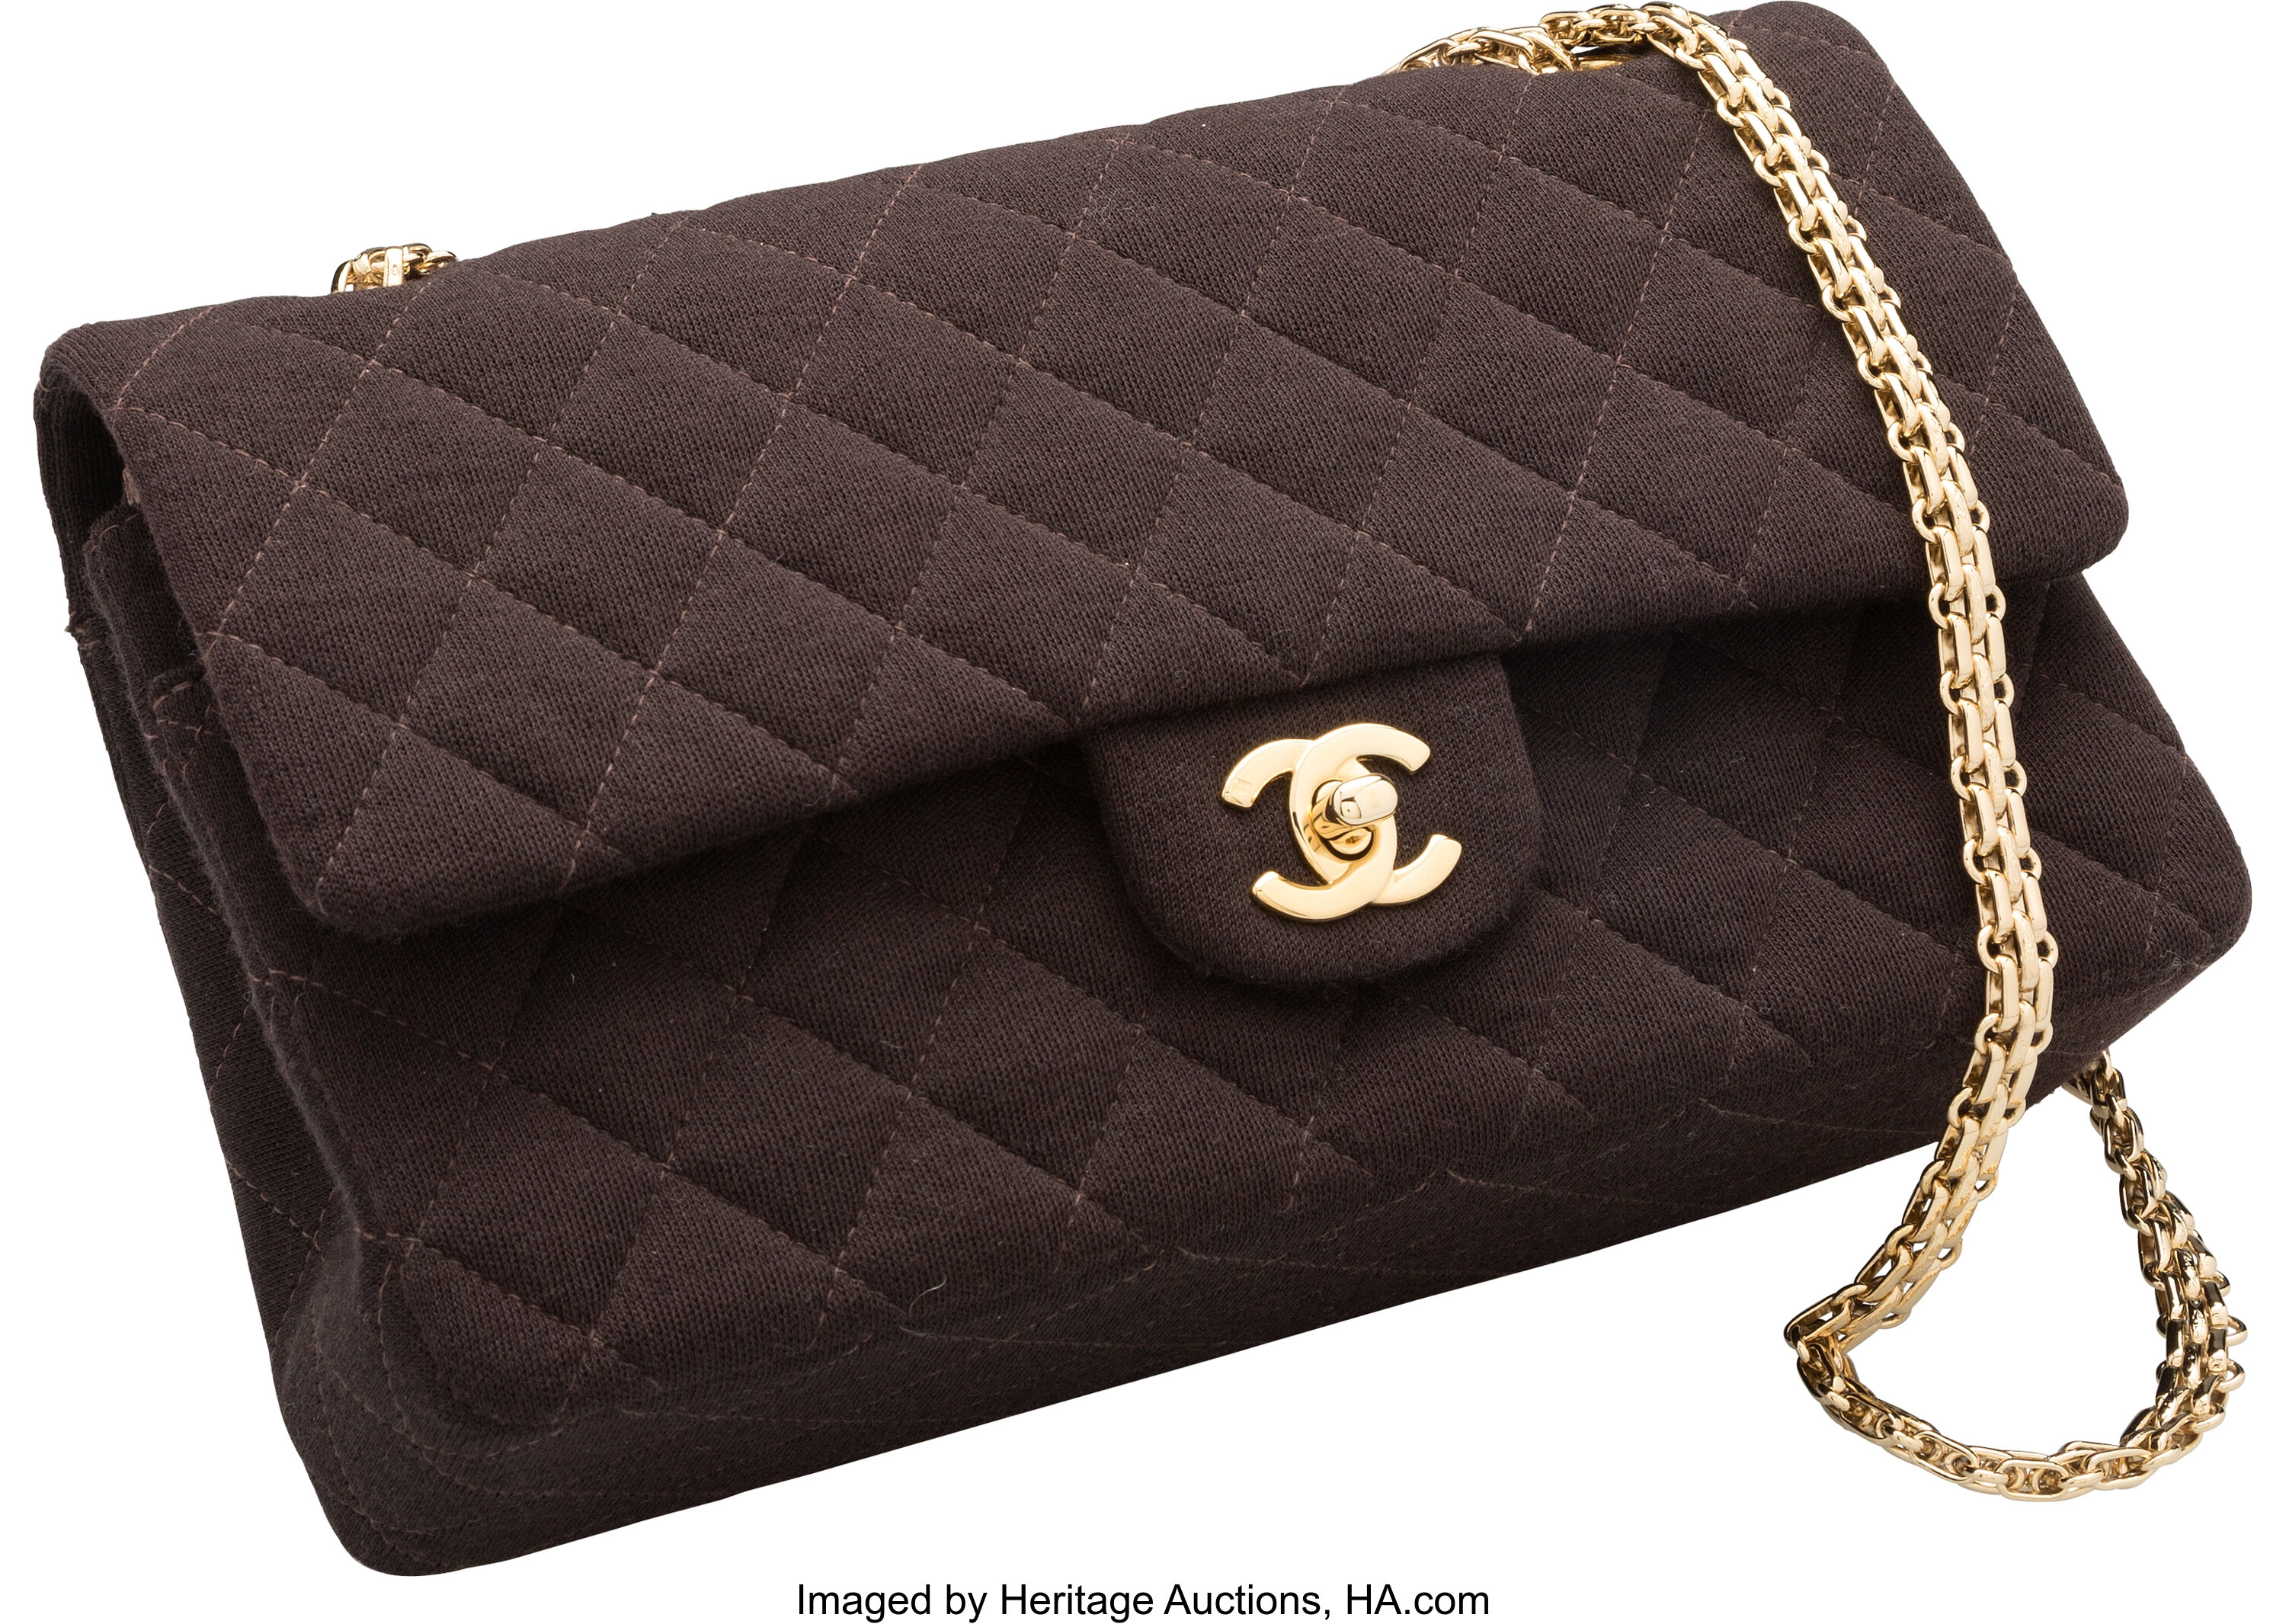 Chanel Brown Quilted Wool Medium Double Flap Bag. Excellent